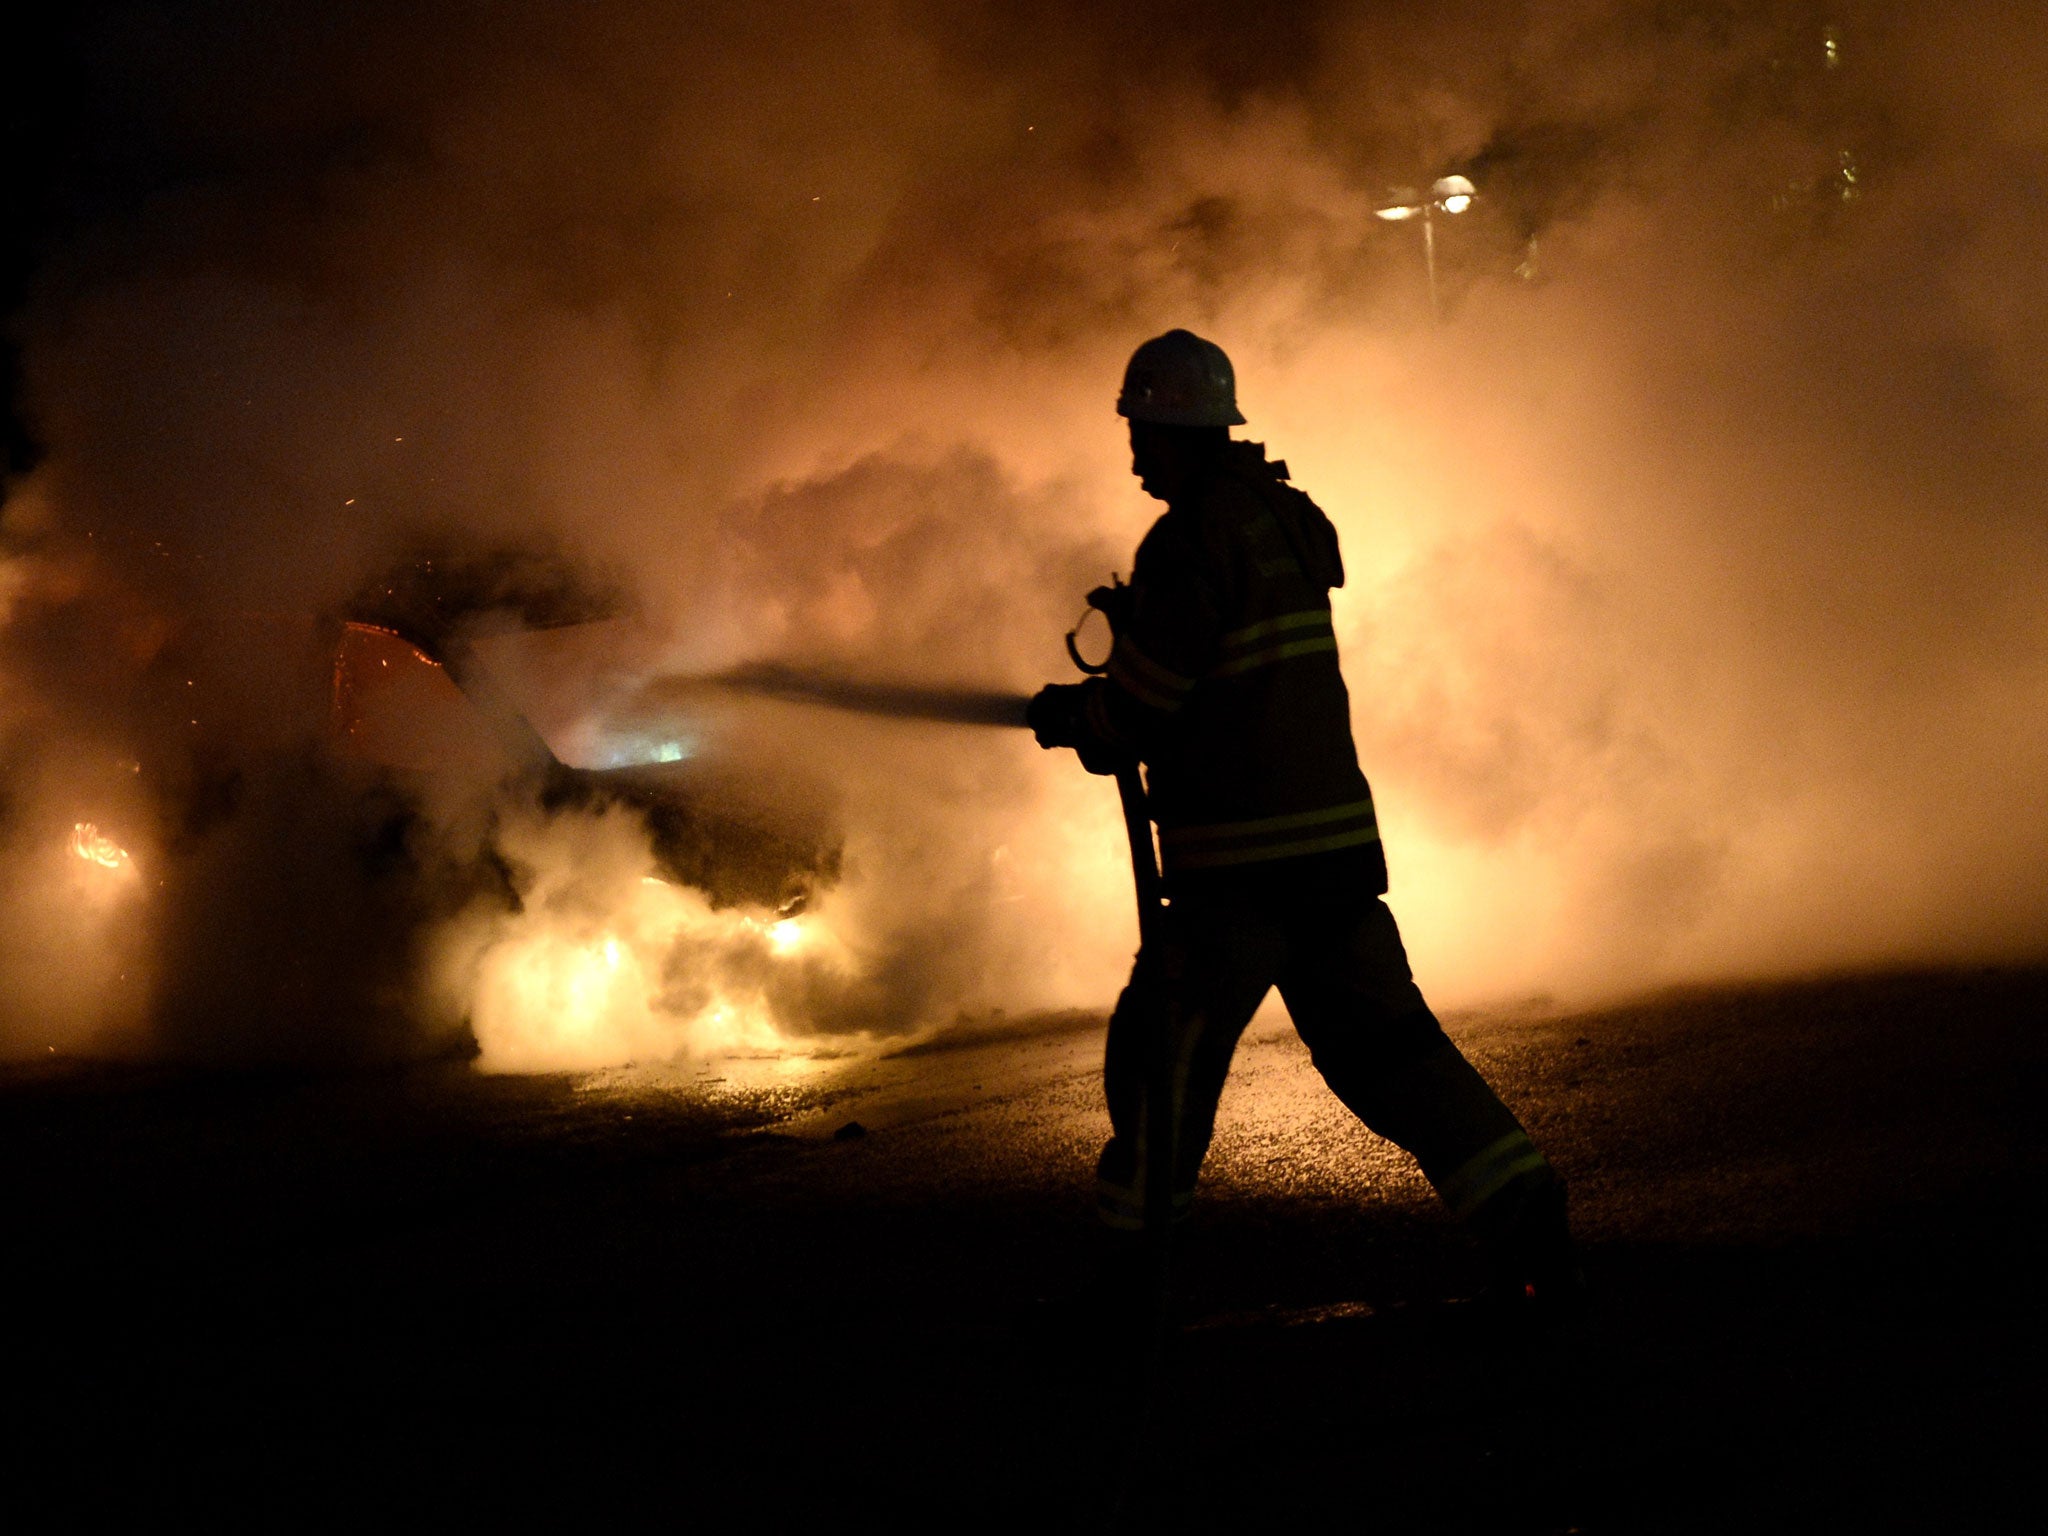 Firefighters douse a burning car in Kista, a Stockholm suburb, last week